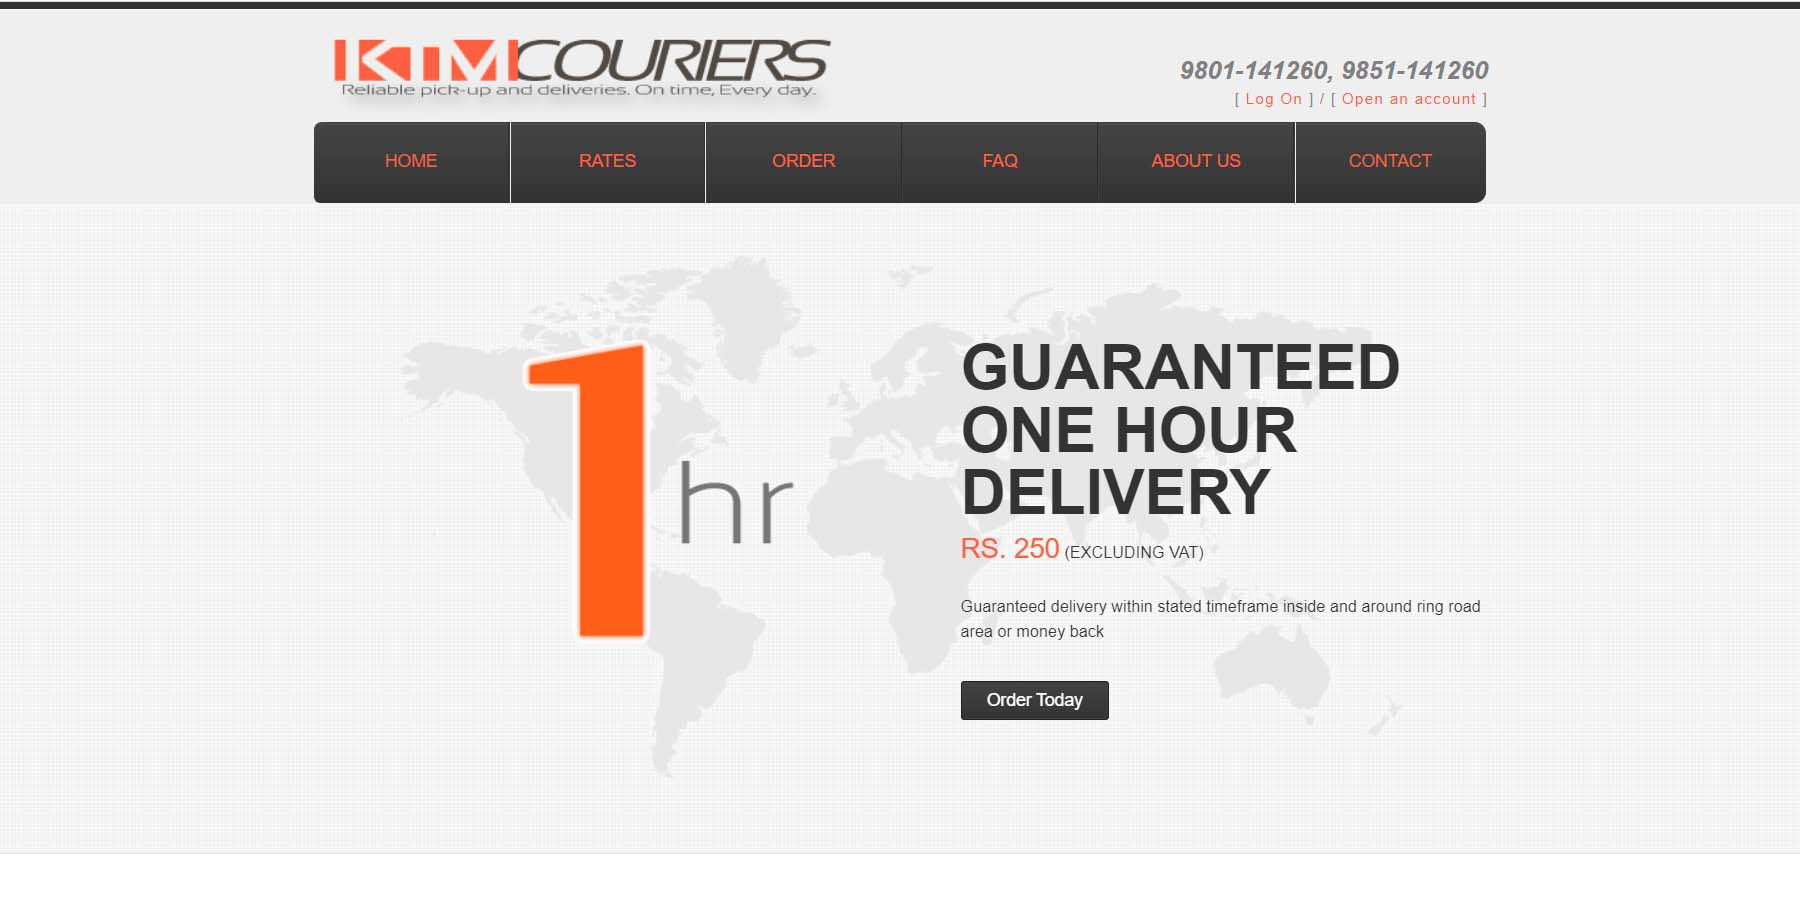 KTM Couriers